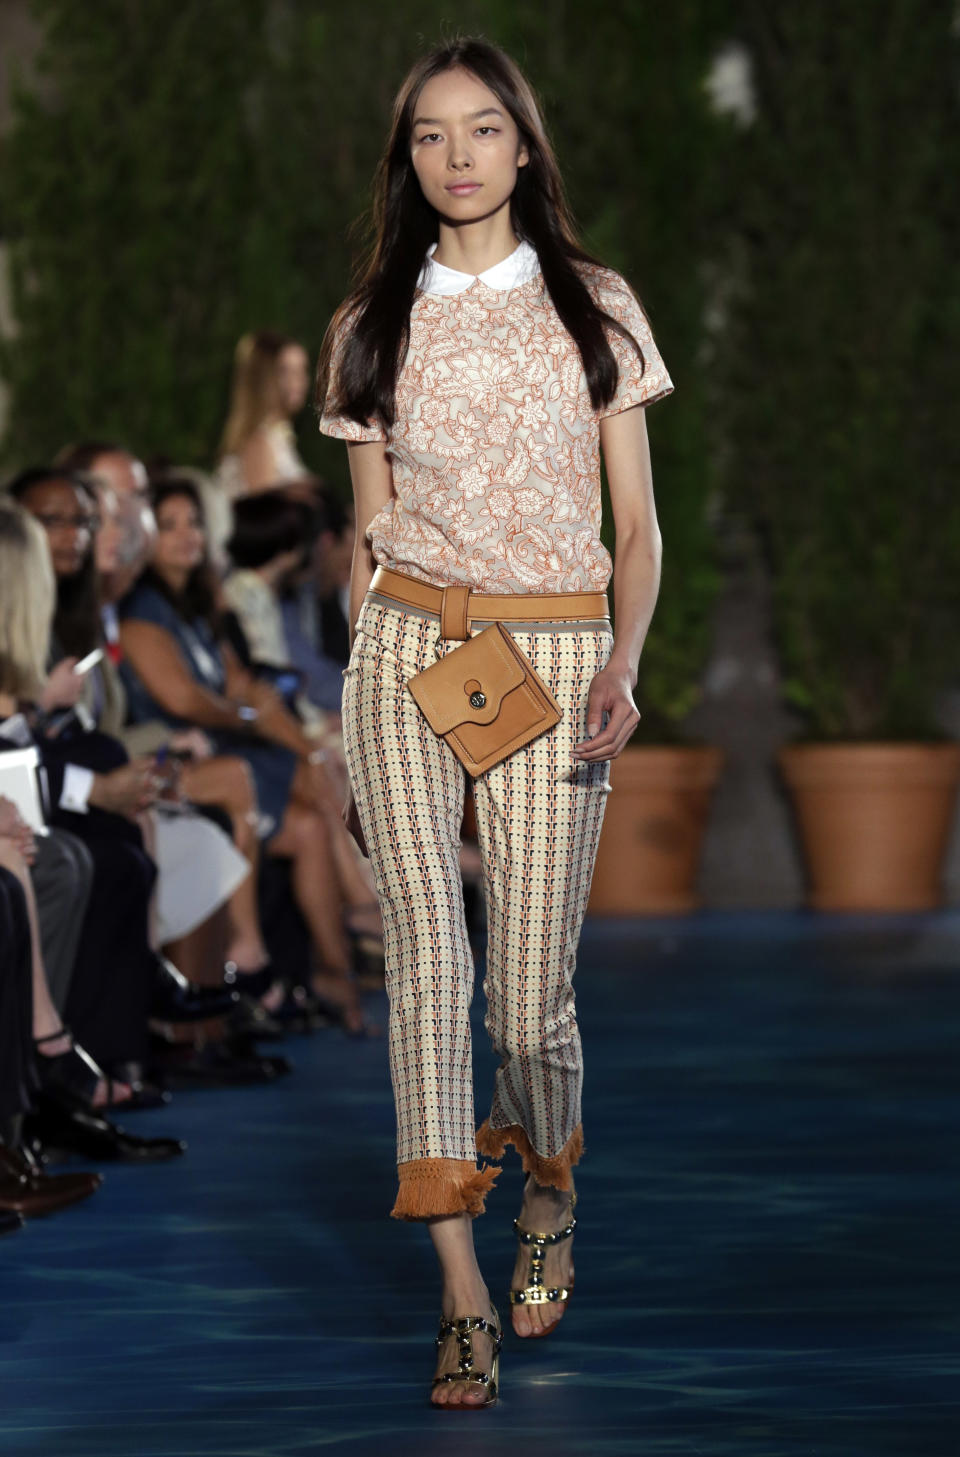 The Tory Burch Spring 2014 collection is modeled during Fashion Week in New York, Tuesday, Sept. 10, 2013. (AP Photo/Richard Drew)